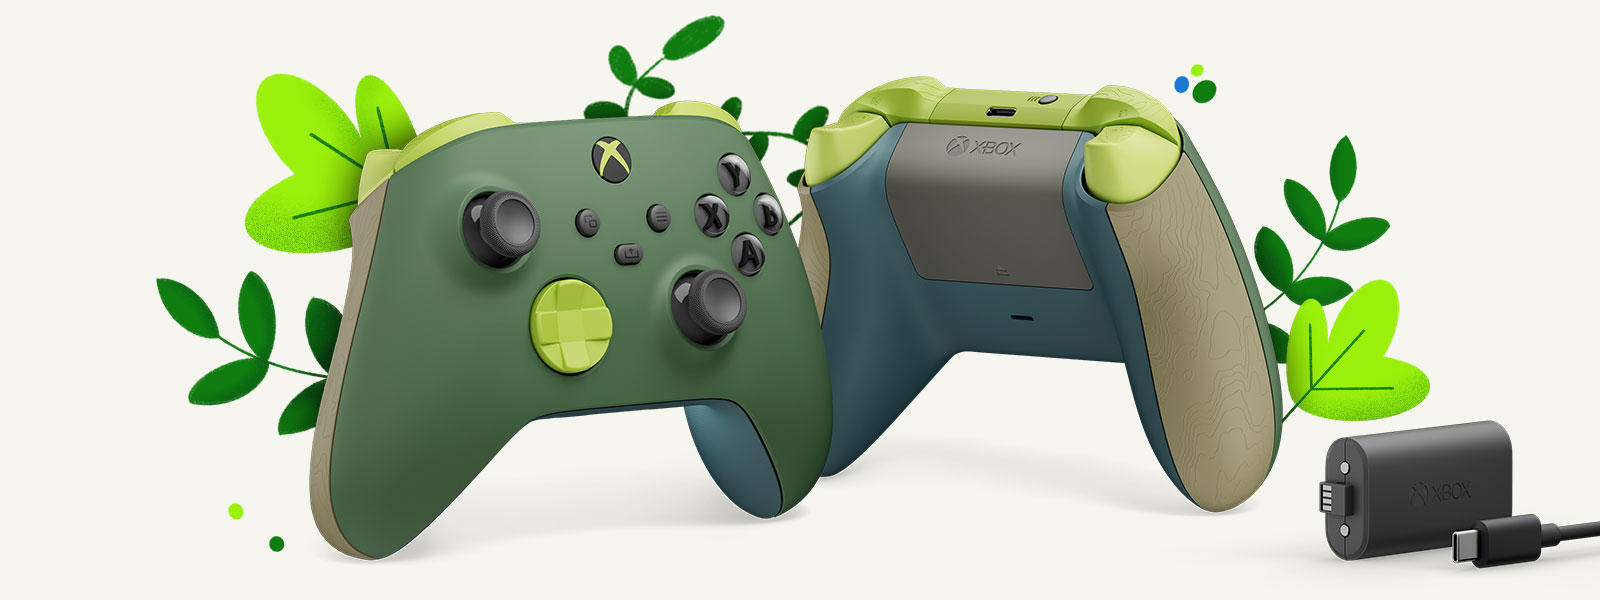 Two controllers are side by side and centre aligned in front of green plants. The first controller displays the front of the Remix Special Edition Wireless Controller and the other displays the back of the Remix Special Edition Wireless Controller. The Xbox Rechargeable Battery Pack is featured on the far right.